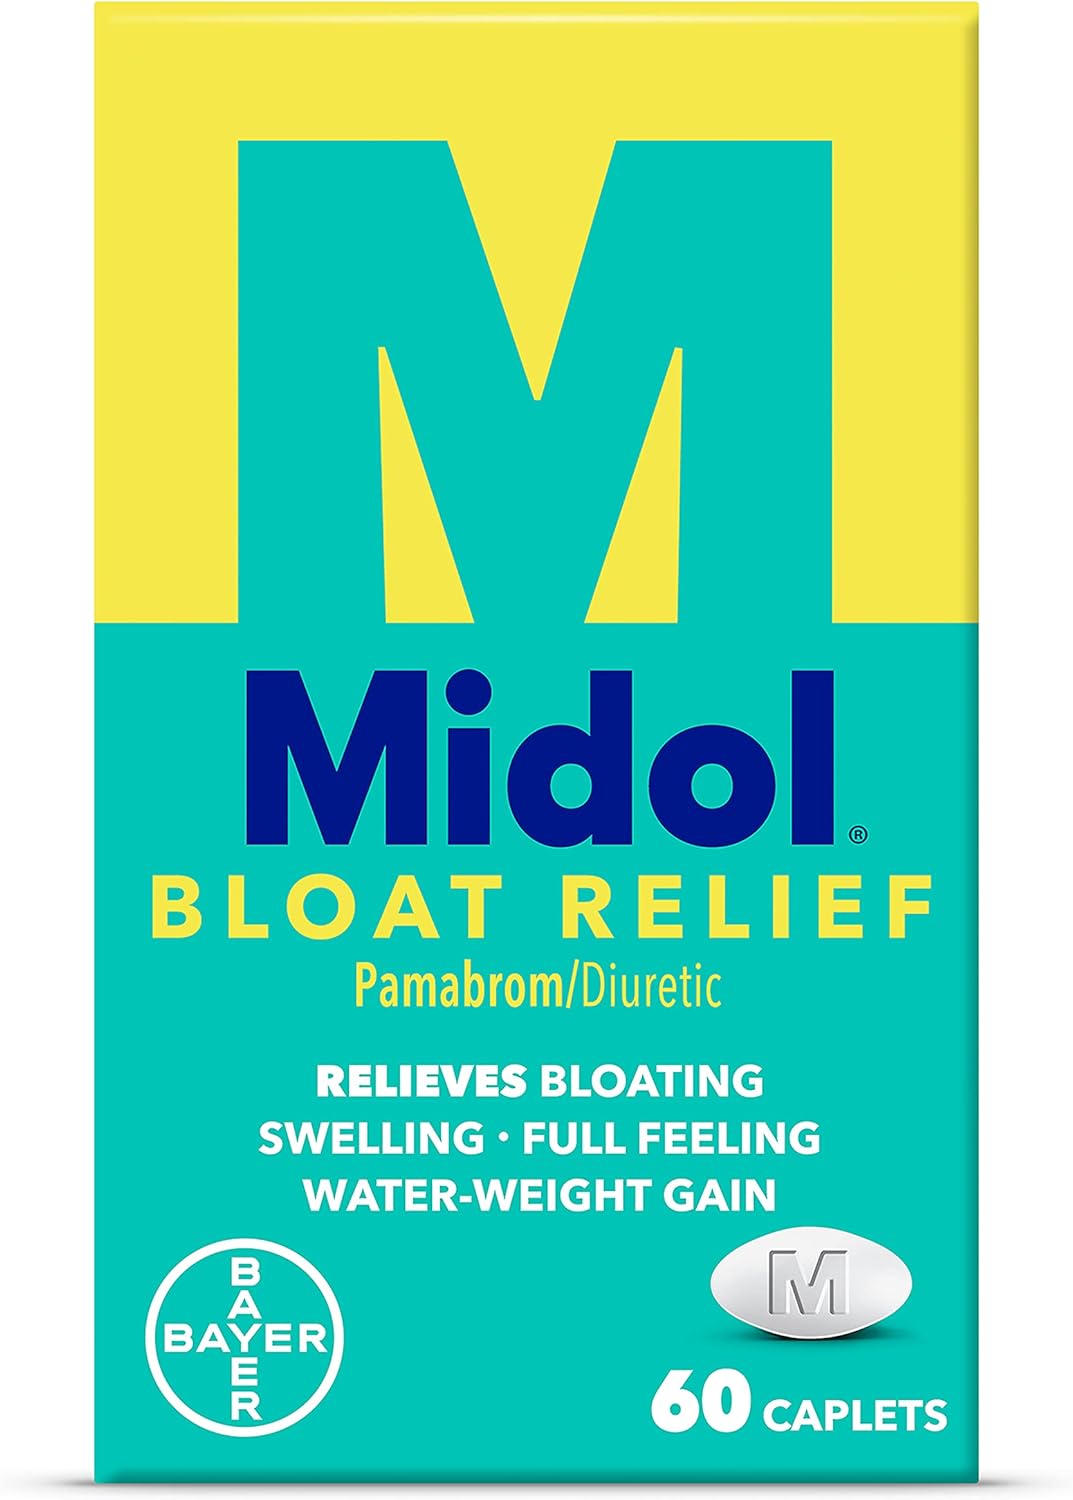 Midol Bloat Relief Caplets 60ct: Midol Bloat Relief Caplets with Pamabrom, Relieve Bloating Symptoms Before and During Your Period, Provides Up to 6 Hours of Bloating Relief for Women, 60 Count